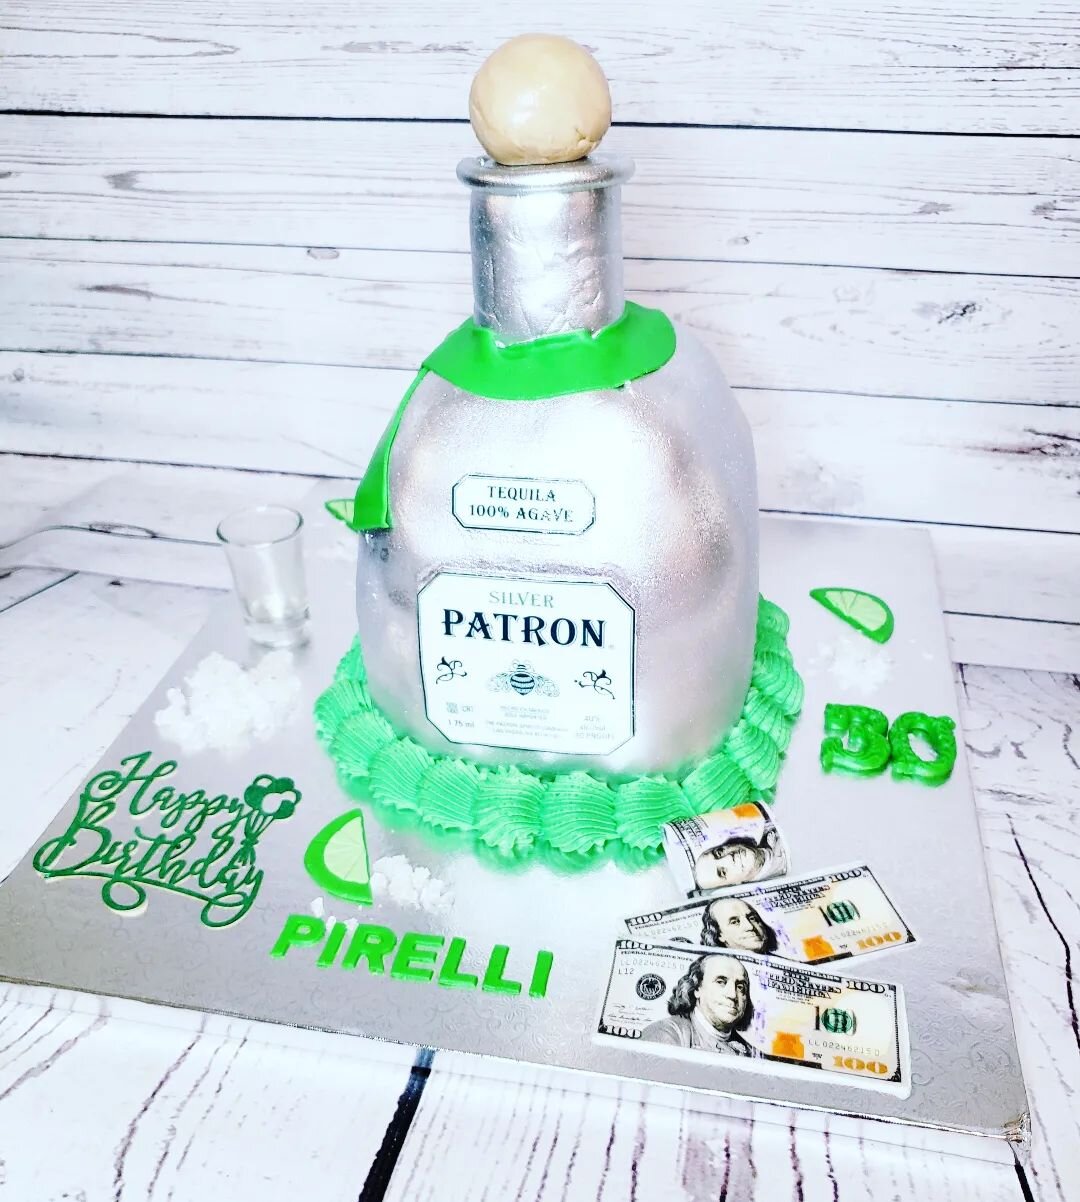 It's the weekend. Time to turn up! Don't do anything that I wouldn't do! #dessertfirst #ieatdessertfirst #dessertfirstlady #michiganbaker #michigancustomcakes #patroncakes